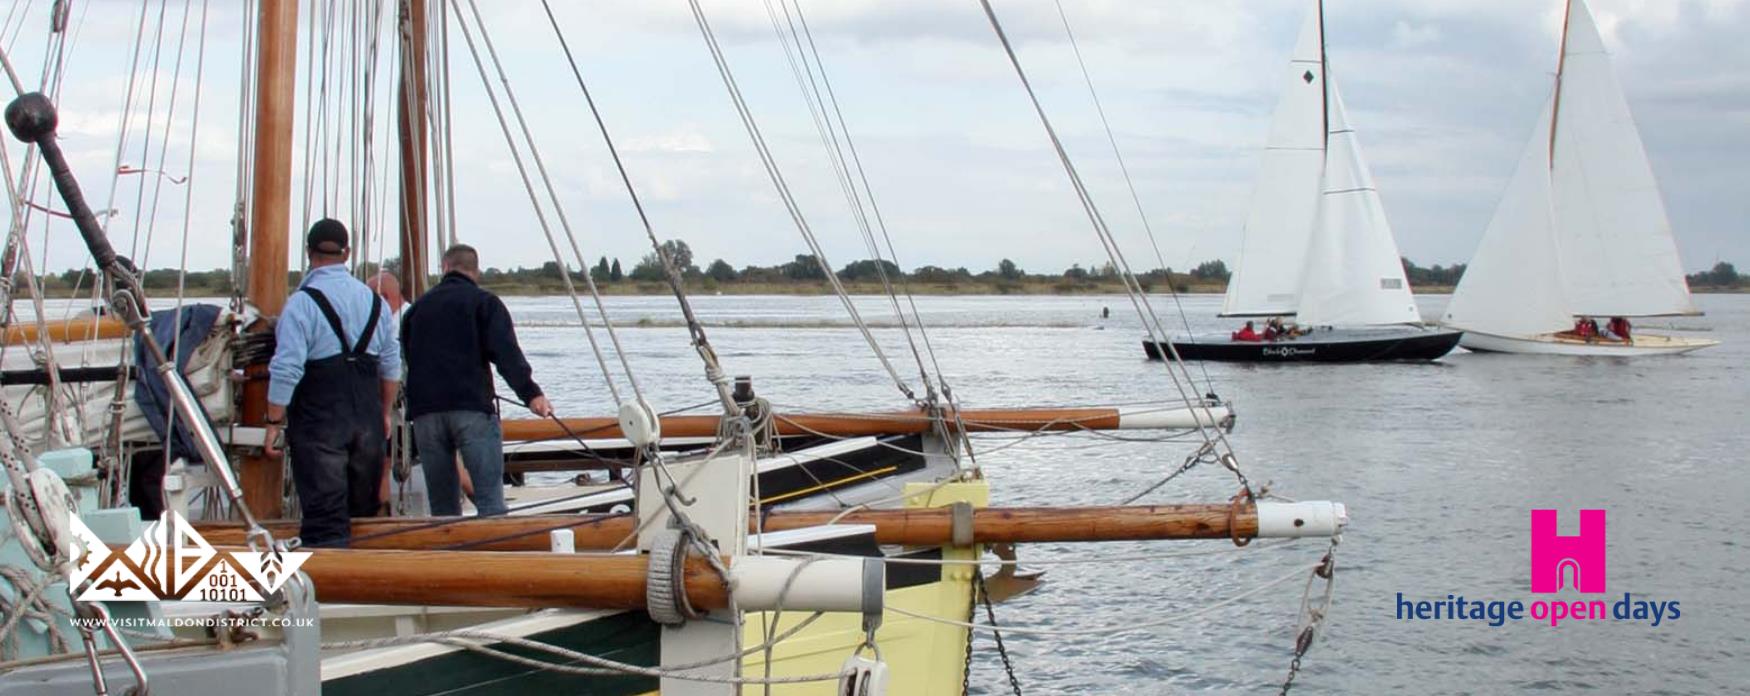 A group of sailors working aboard the Thames Barges moored at Hythe Quay in Maldon